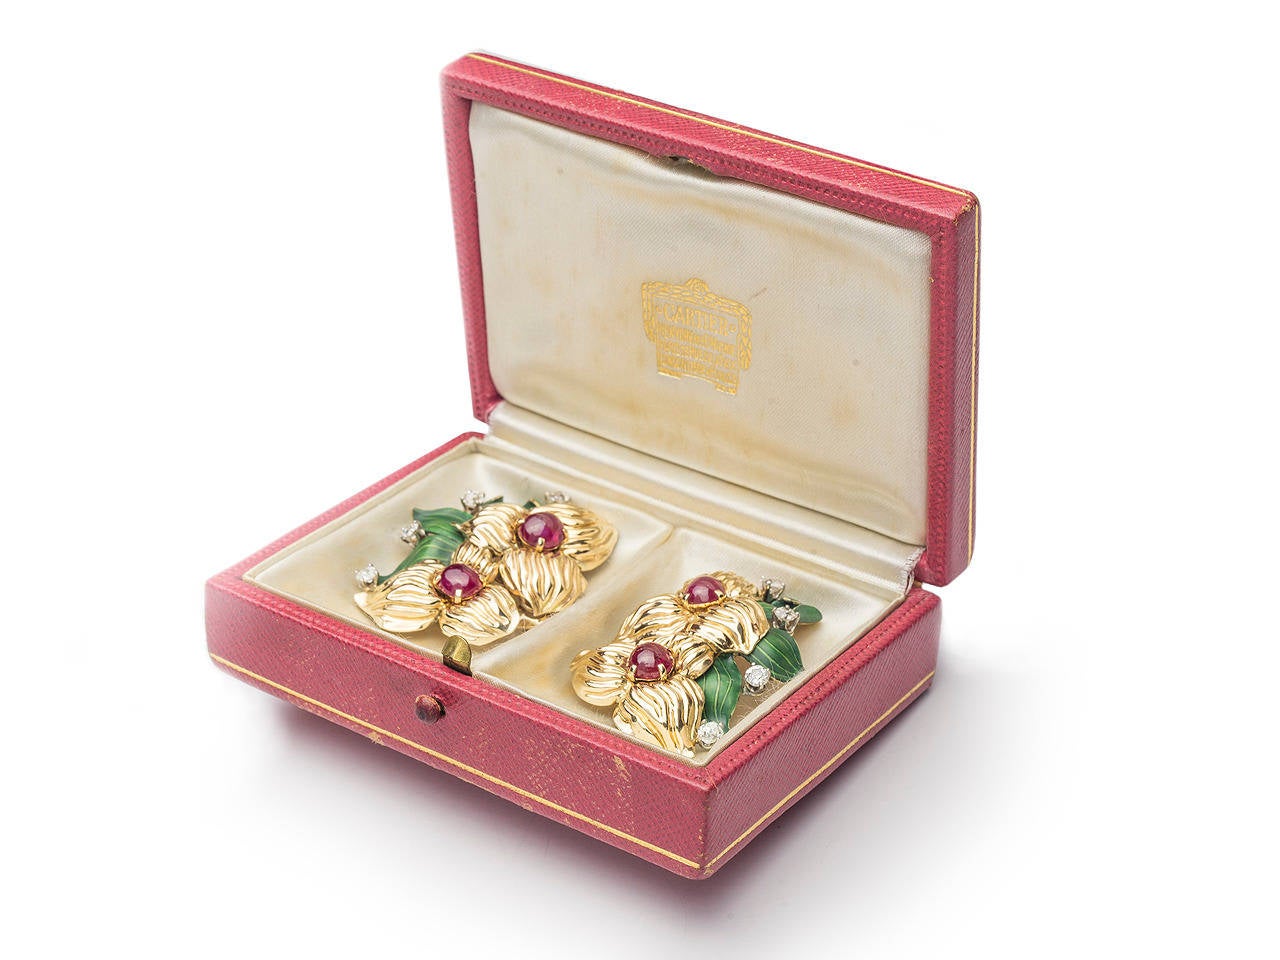 18k gold Flower earclips, with ruby cabochon, round diamonds and enamel leaves. Signed CARTIER. In fitted box with brooch fitting.
